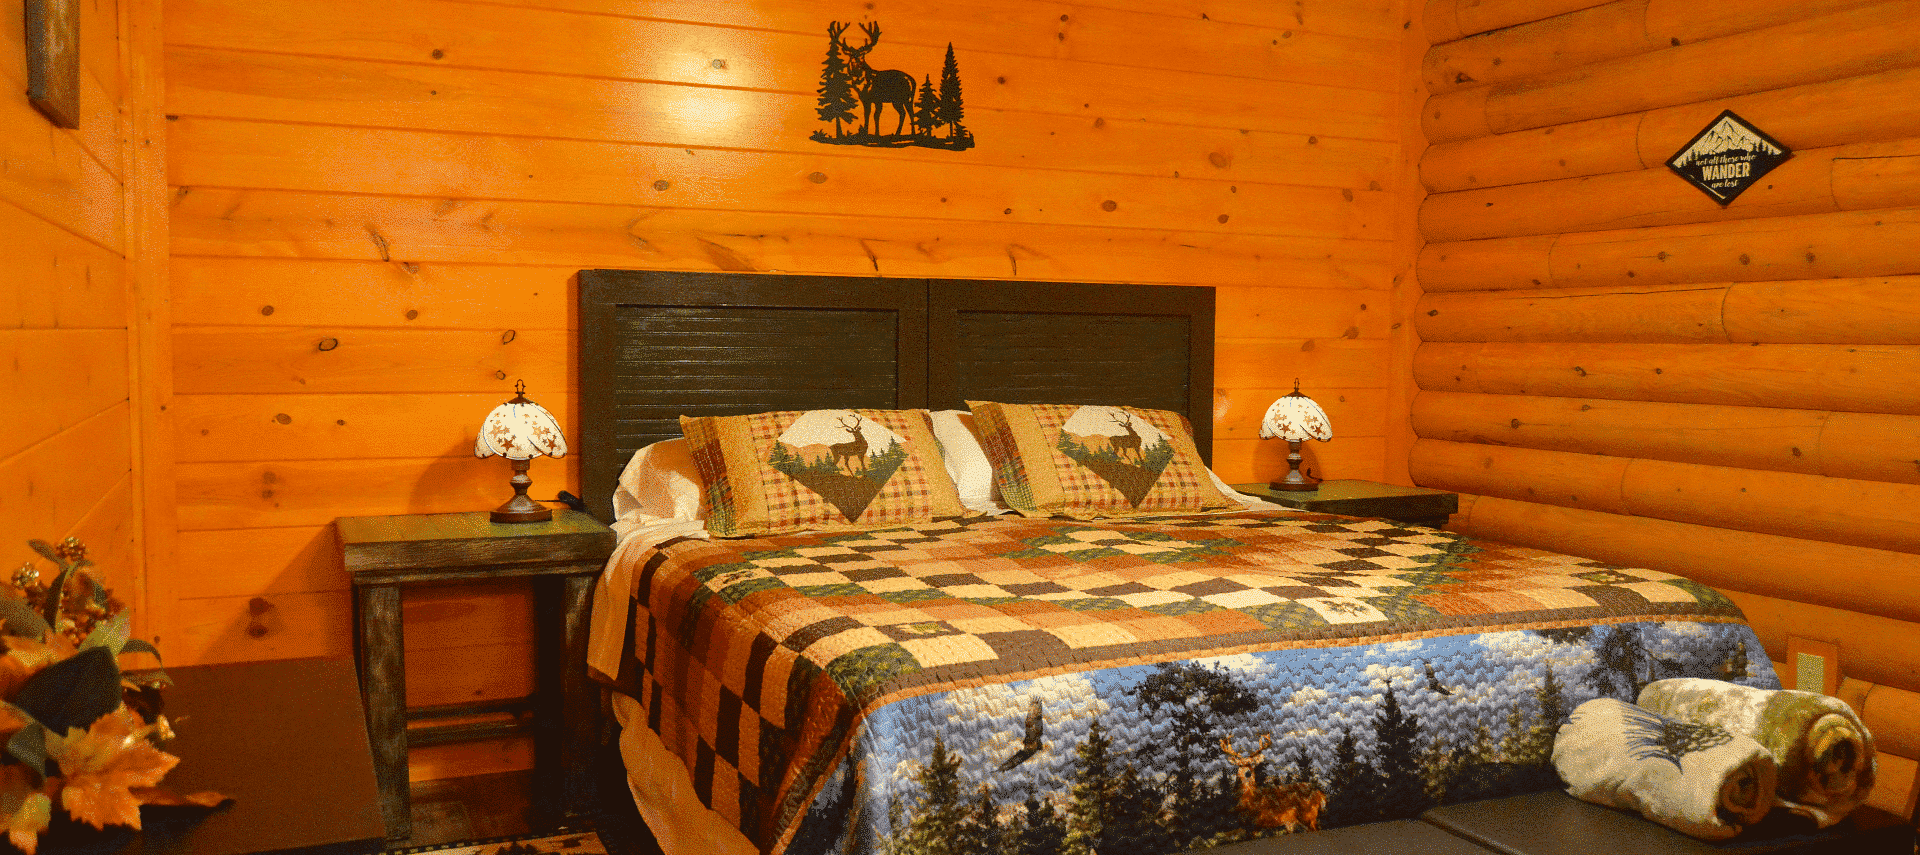 Quaint bedroom in a log home with king bed, colorful quilt and bedside tables with lamps